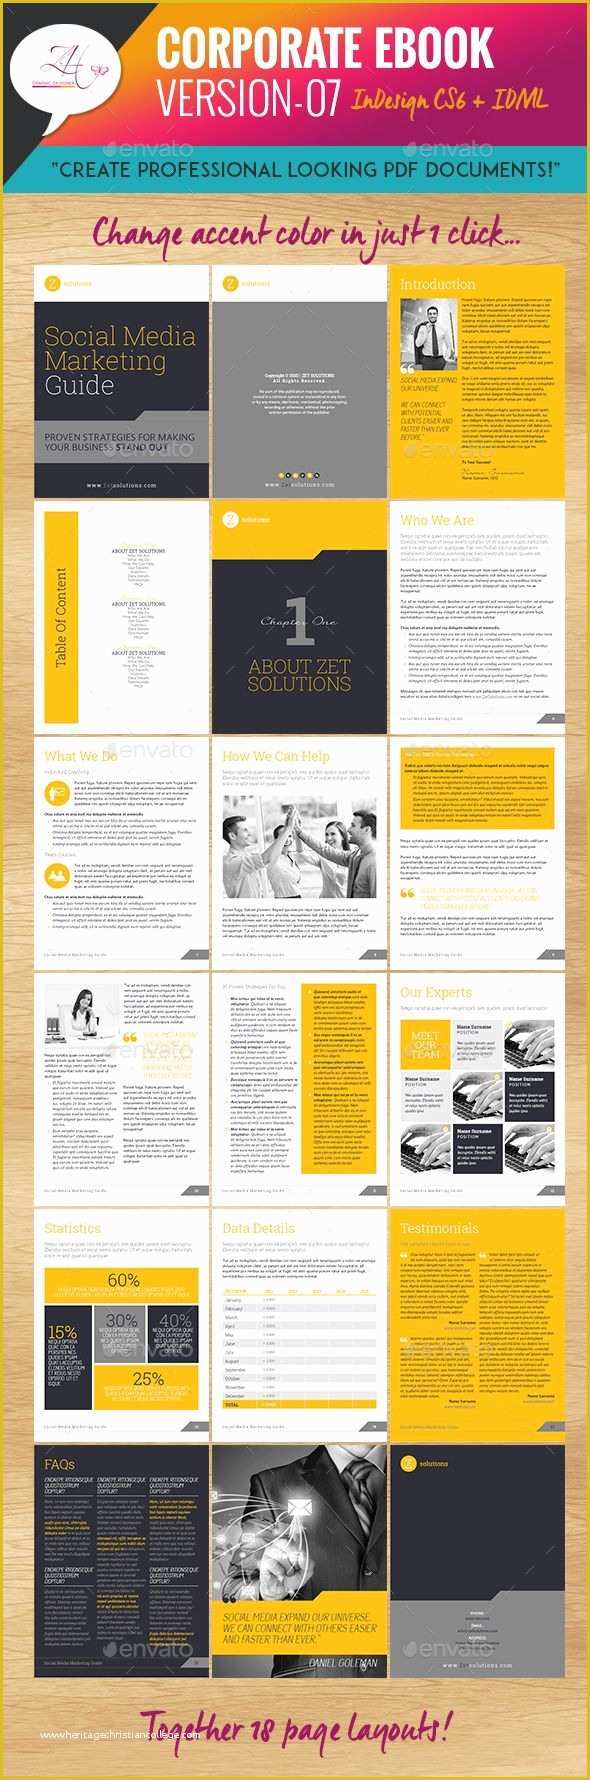 Indesign Ebook Template Free Download Of Corporate Ebook Template Design Download